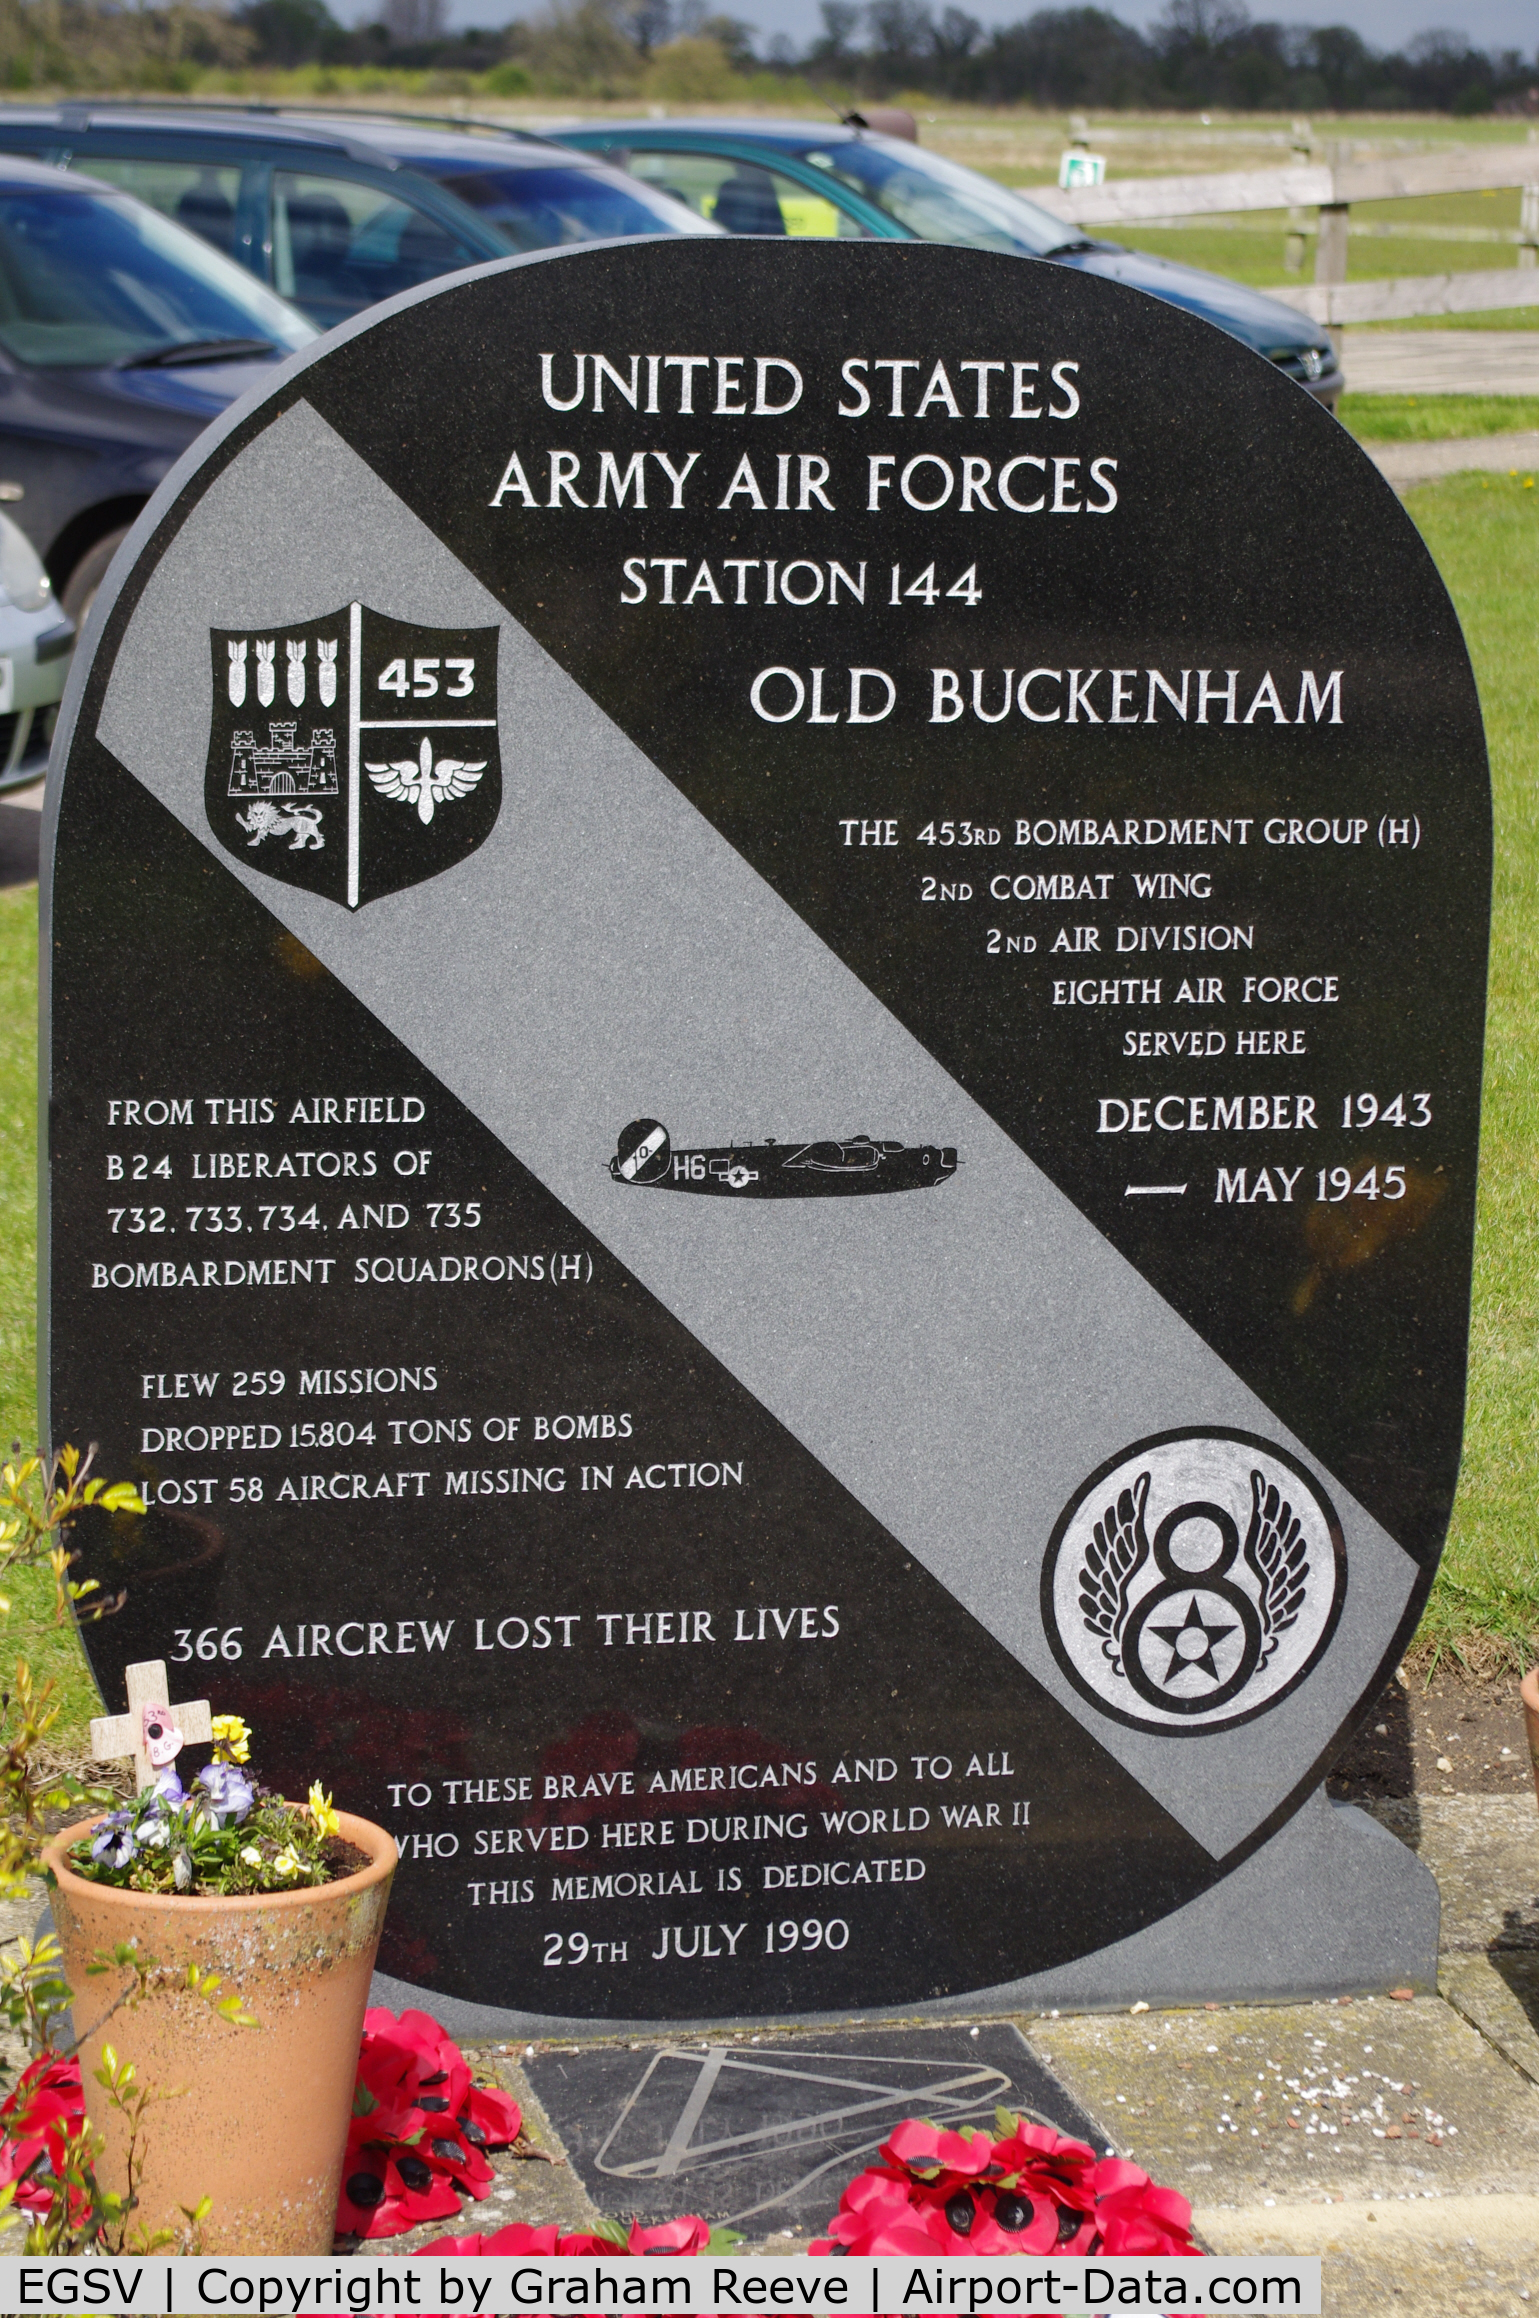 Old Buckenham Airport, Norwich, England United Kingdom (EGSV) - Memorial to the United States Army Air Force at Old Buckenham.